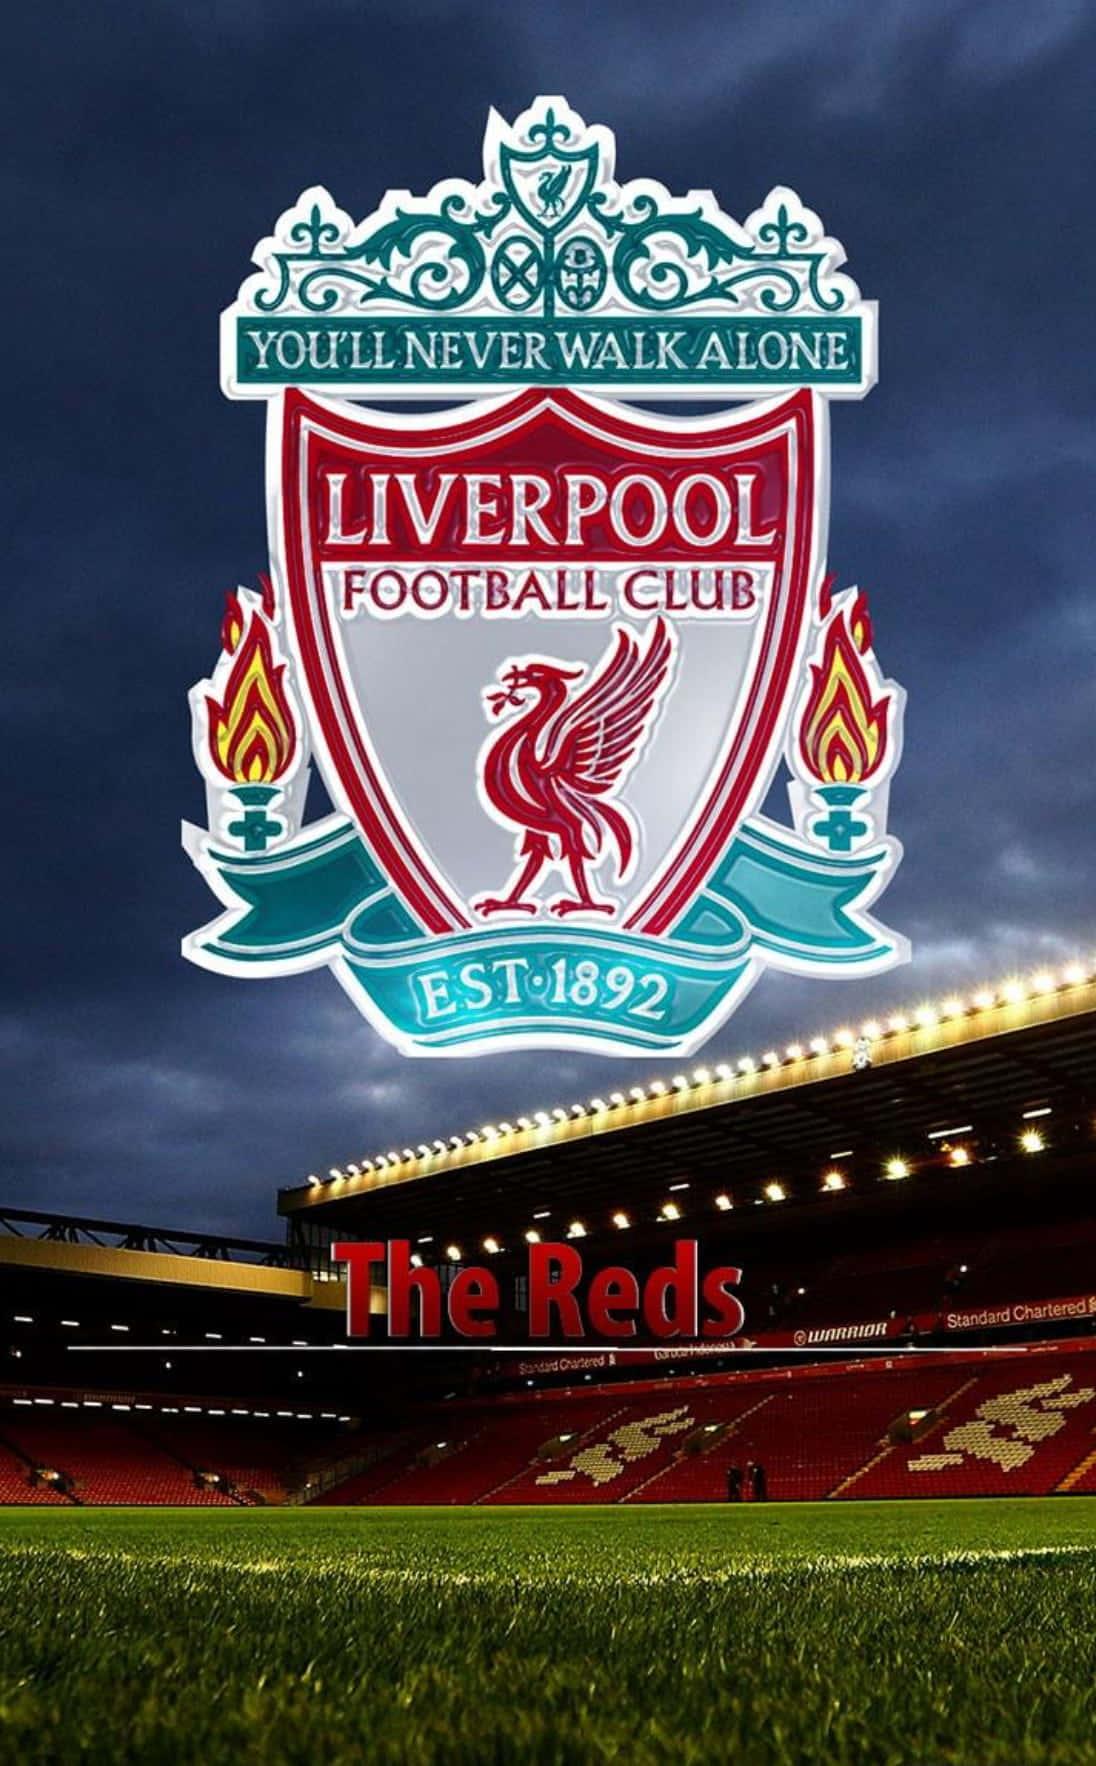 Show Your Allegiance To The Reds With This Iconic Liverpool Fc Logo! Wallpaper